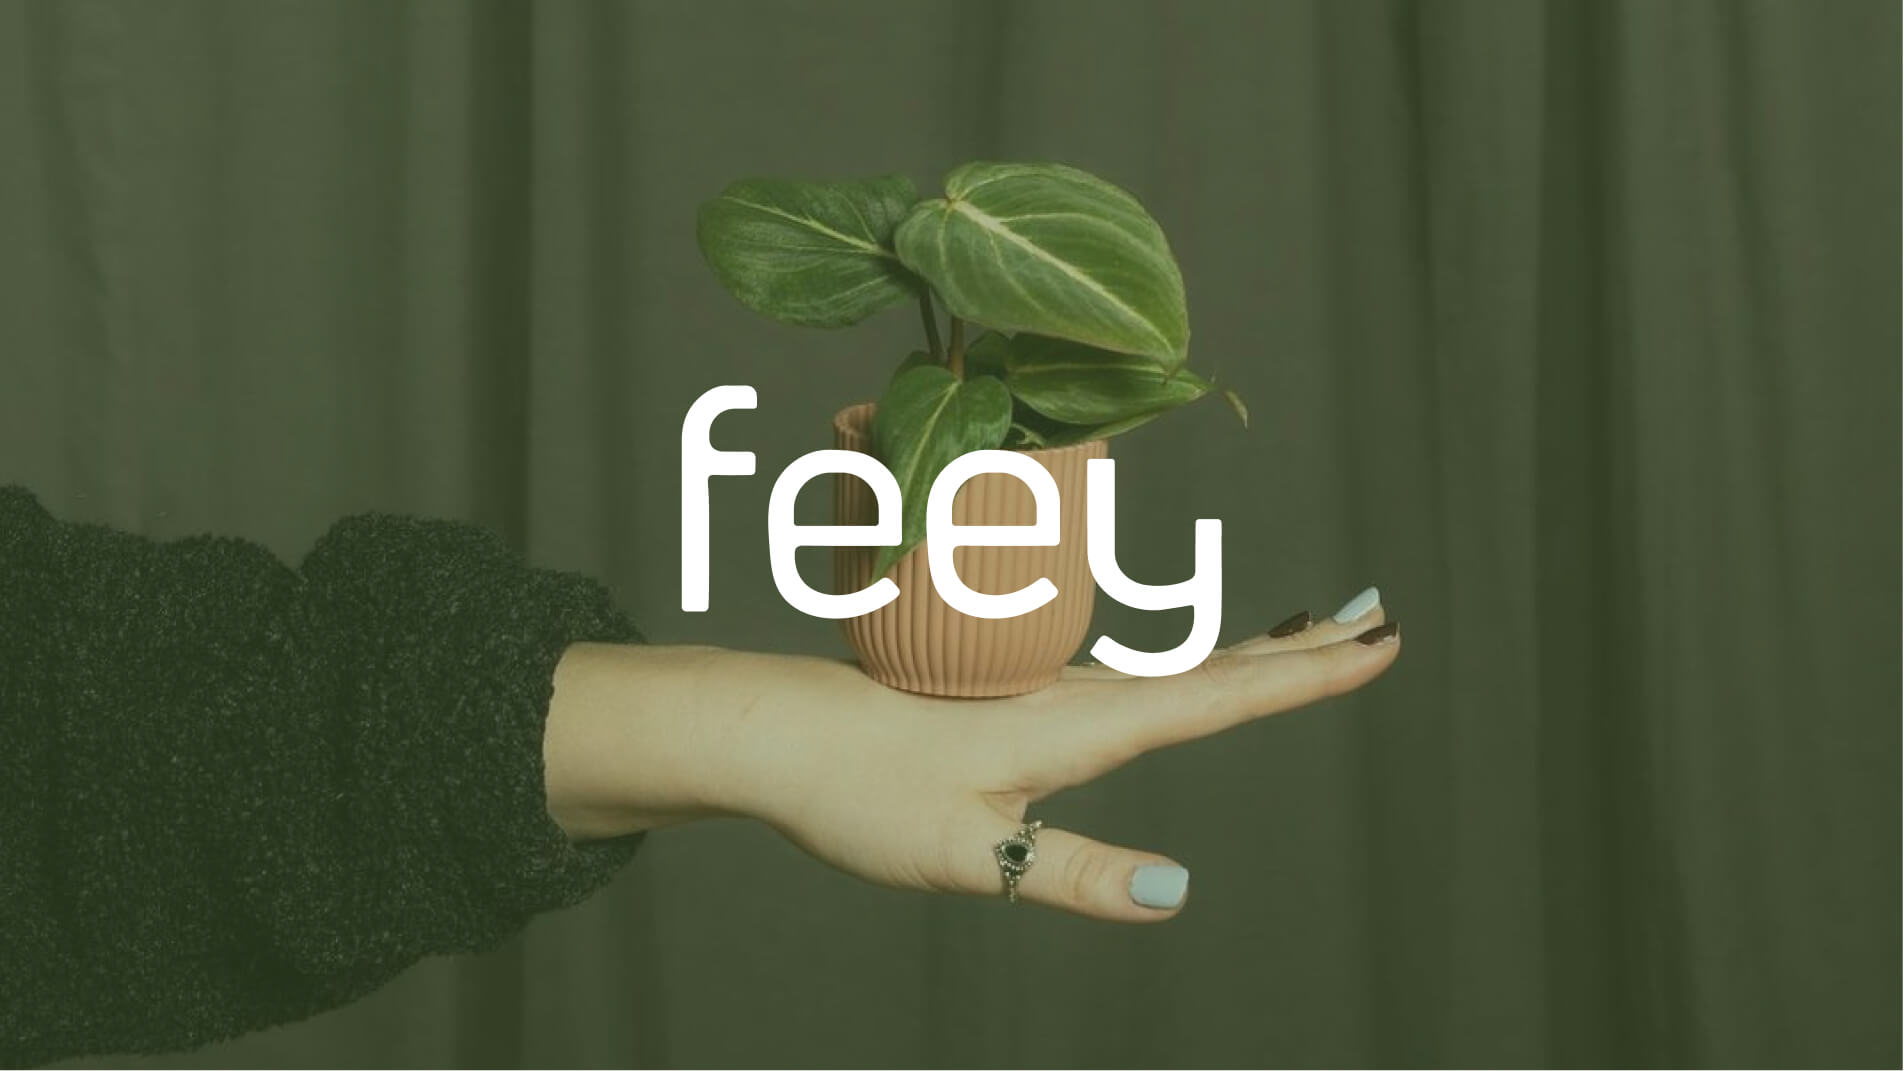 Don’t Stop Be-leafing: FEEY Plants a Seed, Grows AOV 20%